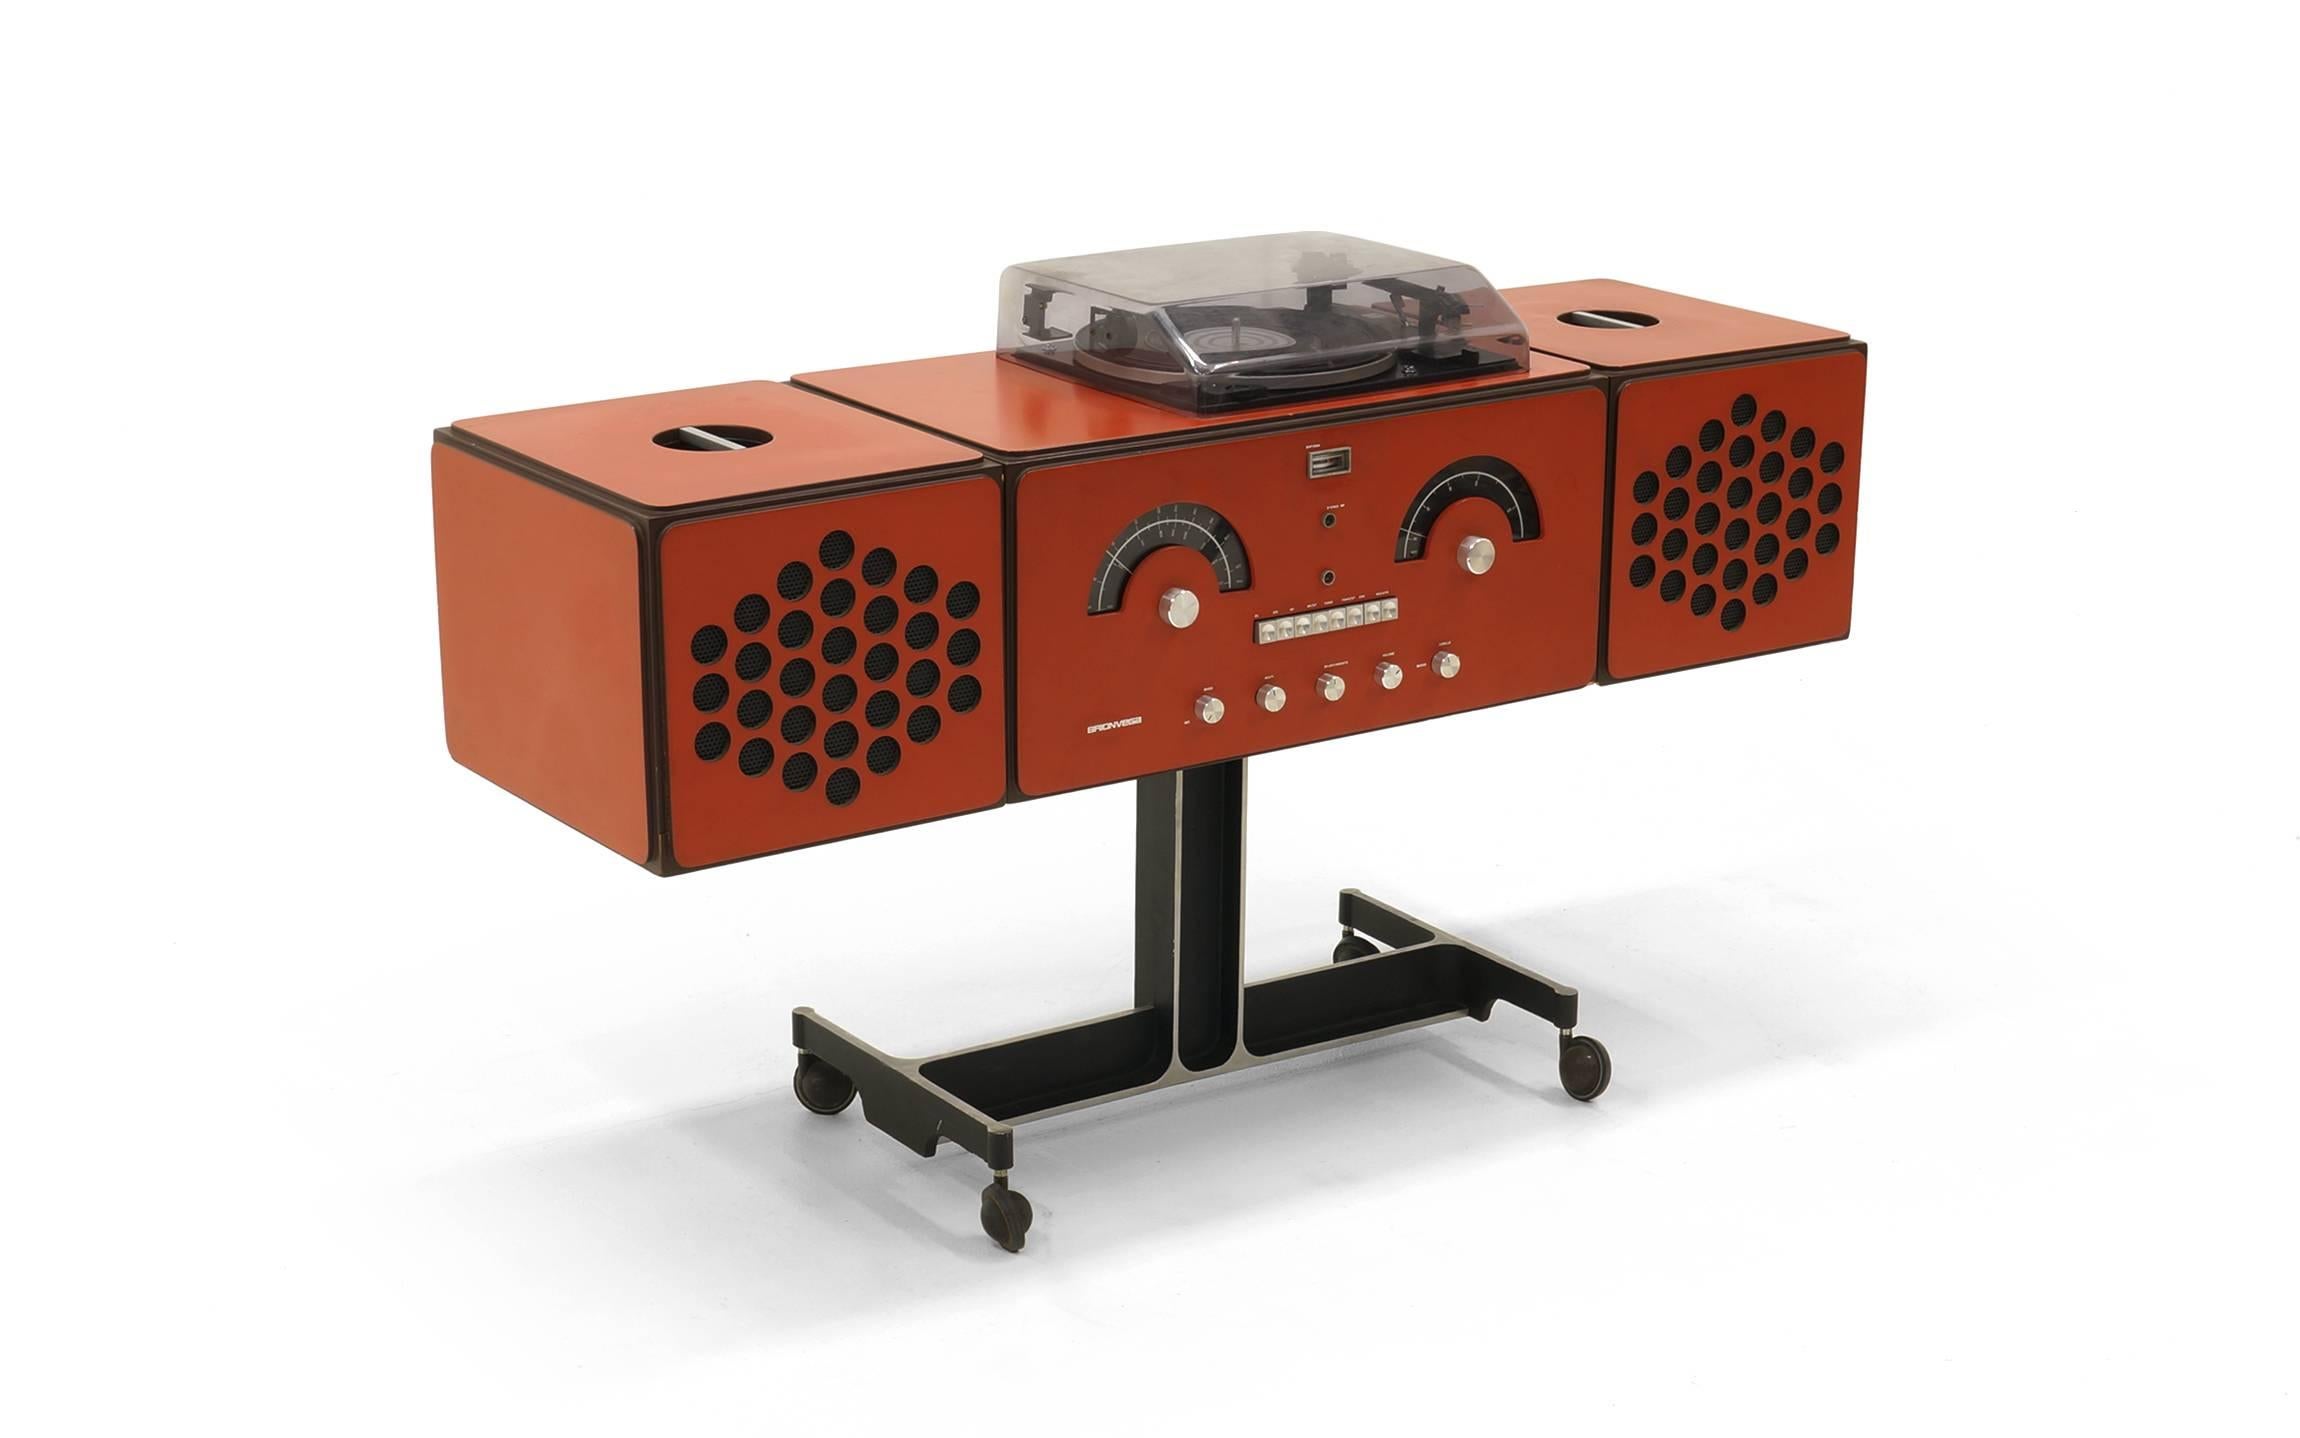 Original, Iconic Brionvega RR126 portable stereo. Fully serviced and working beautifully.  Converted to 110v for use in the USA.  The turntable, with original dust cover, is mounted to the top and the speakers lift off and on with an inset handle on